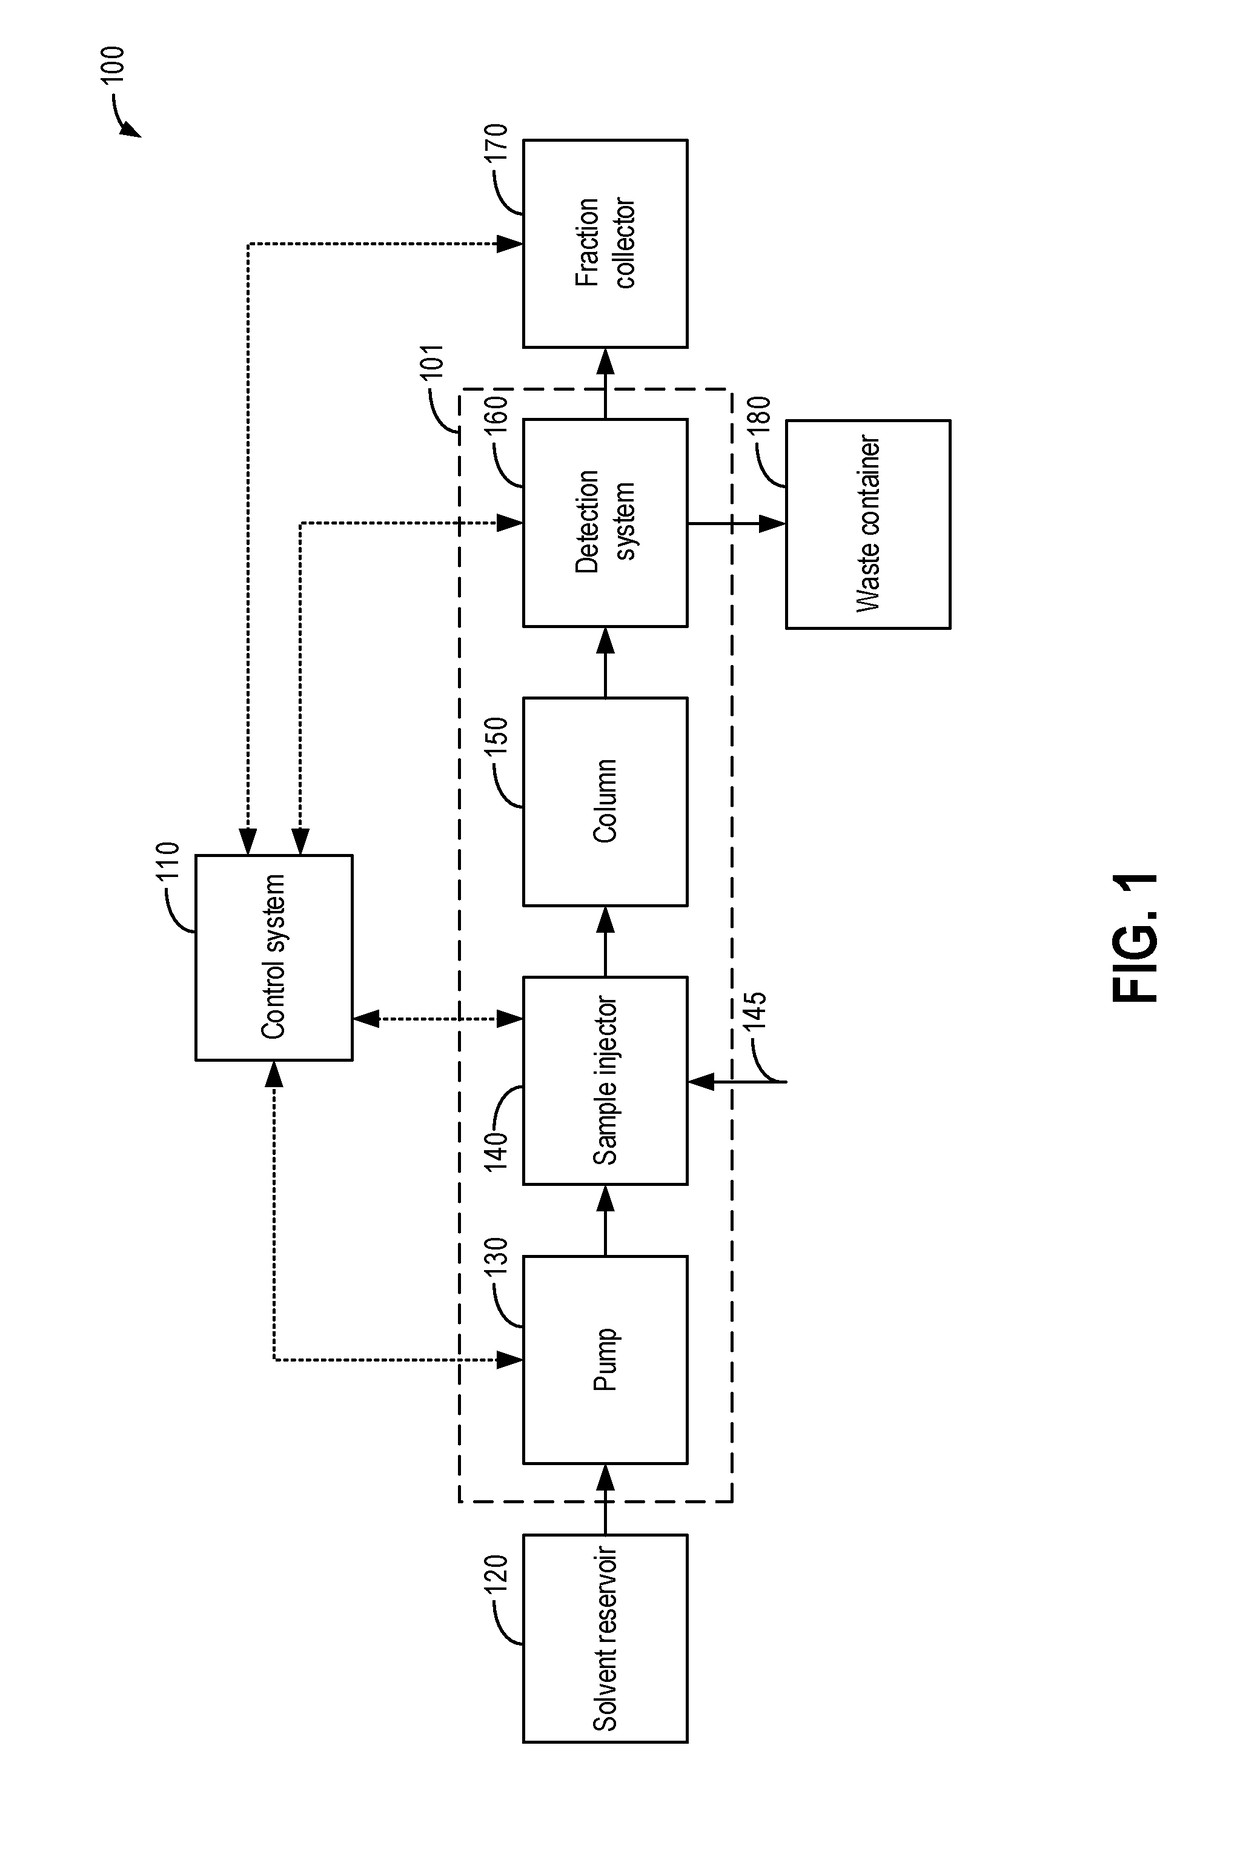 Integrated illumination-detection flow cell for liquid chromatography